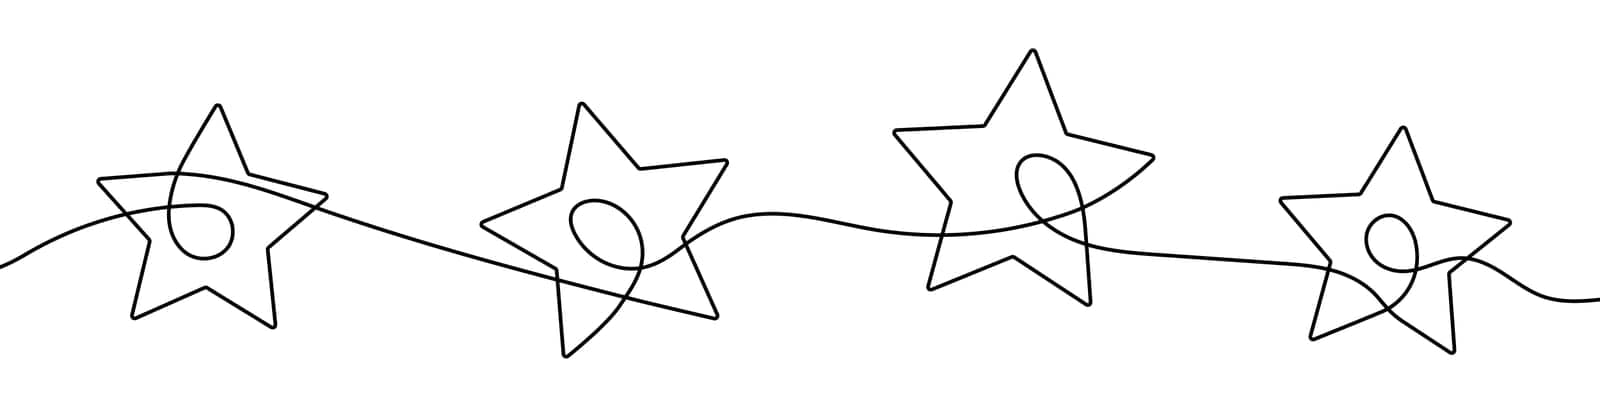 Continuous line drawing of stars. One line drawing background. Vector illustration. Single line star icons.